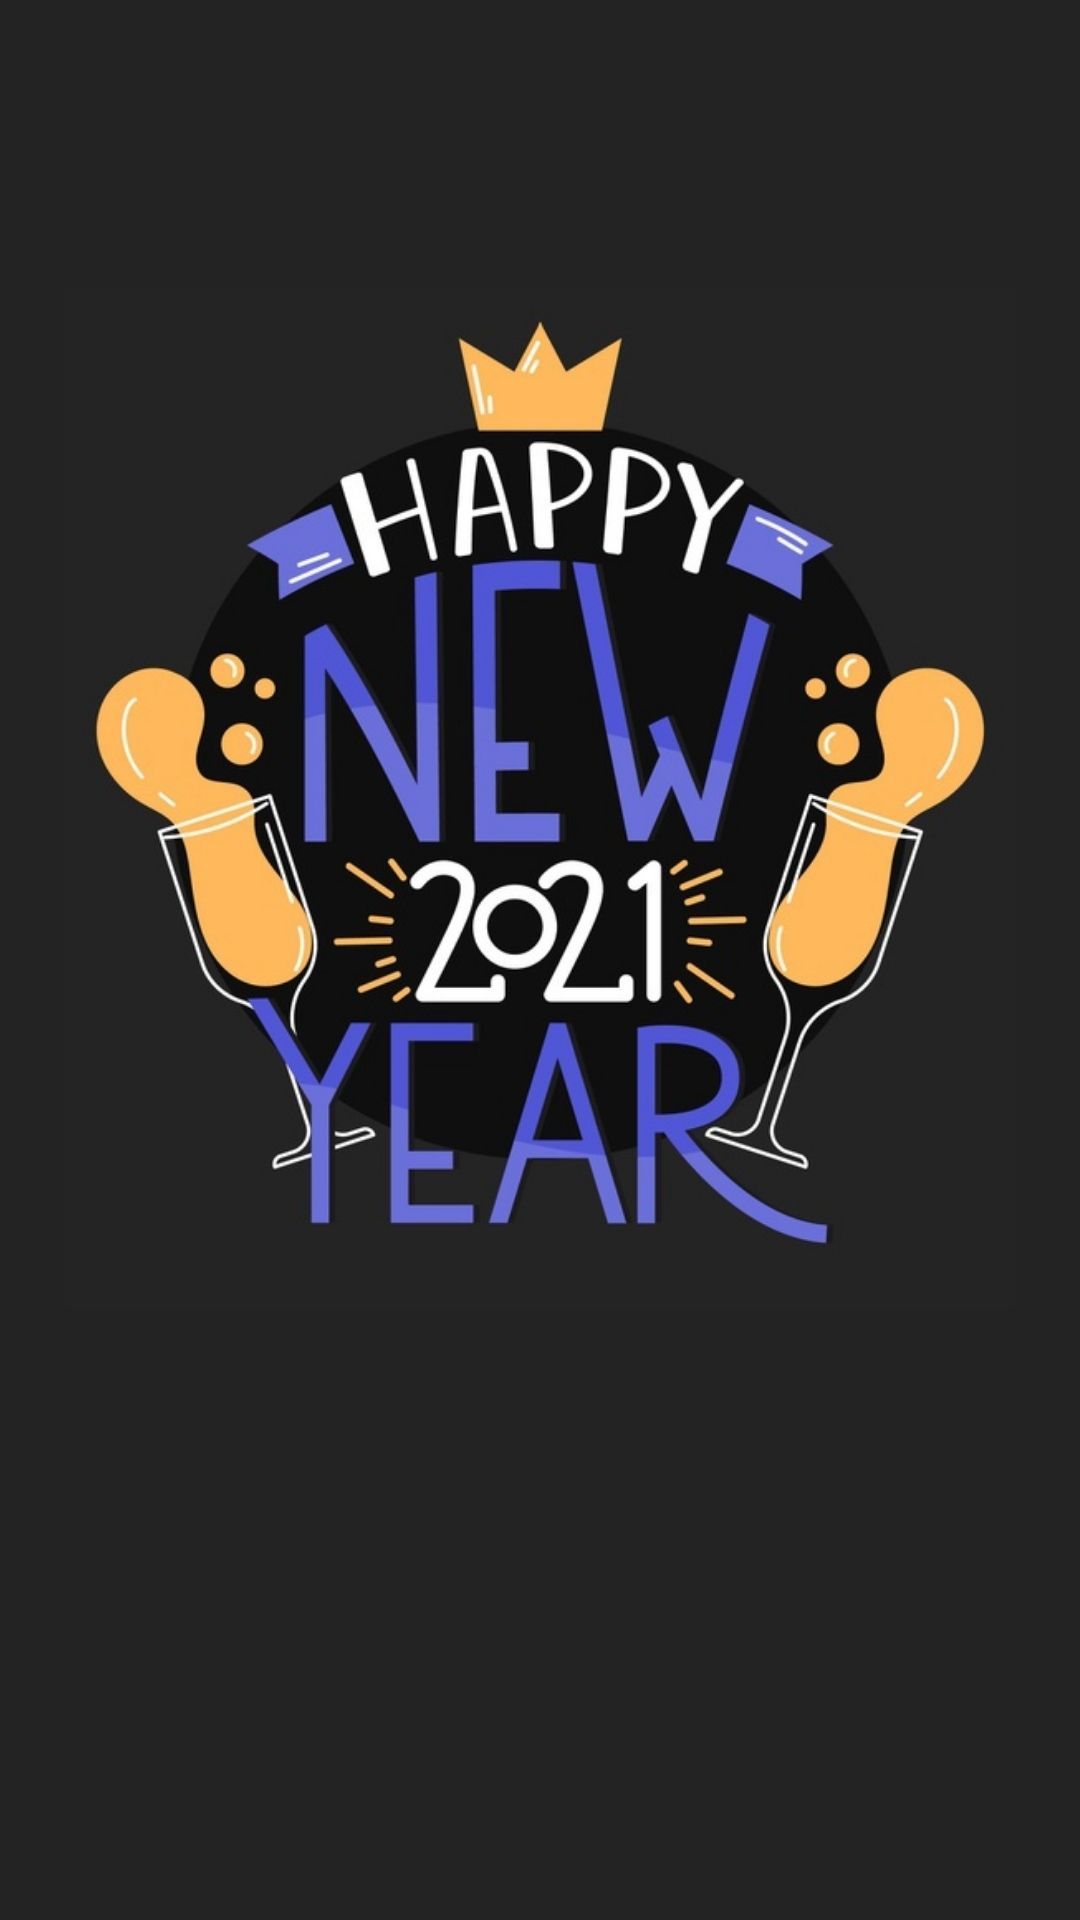 New year cute wallpaper 2021 for Android and iPhone background. Cute wallpaper, Happy new year image, Happy new year wallpaper